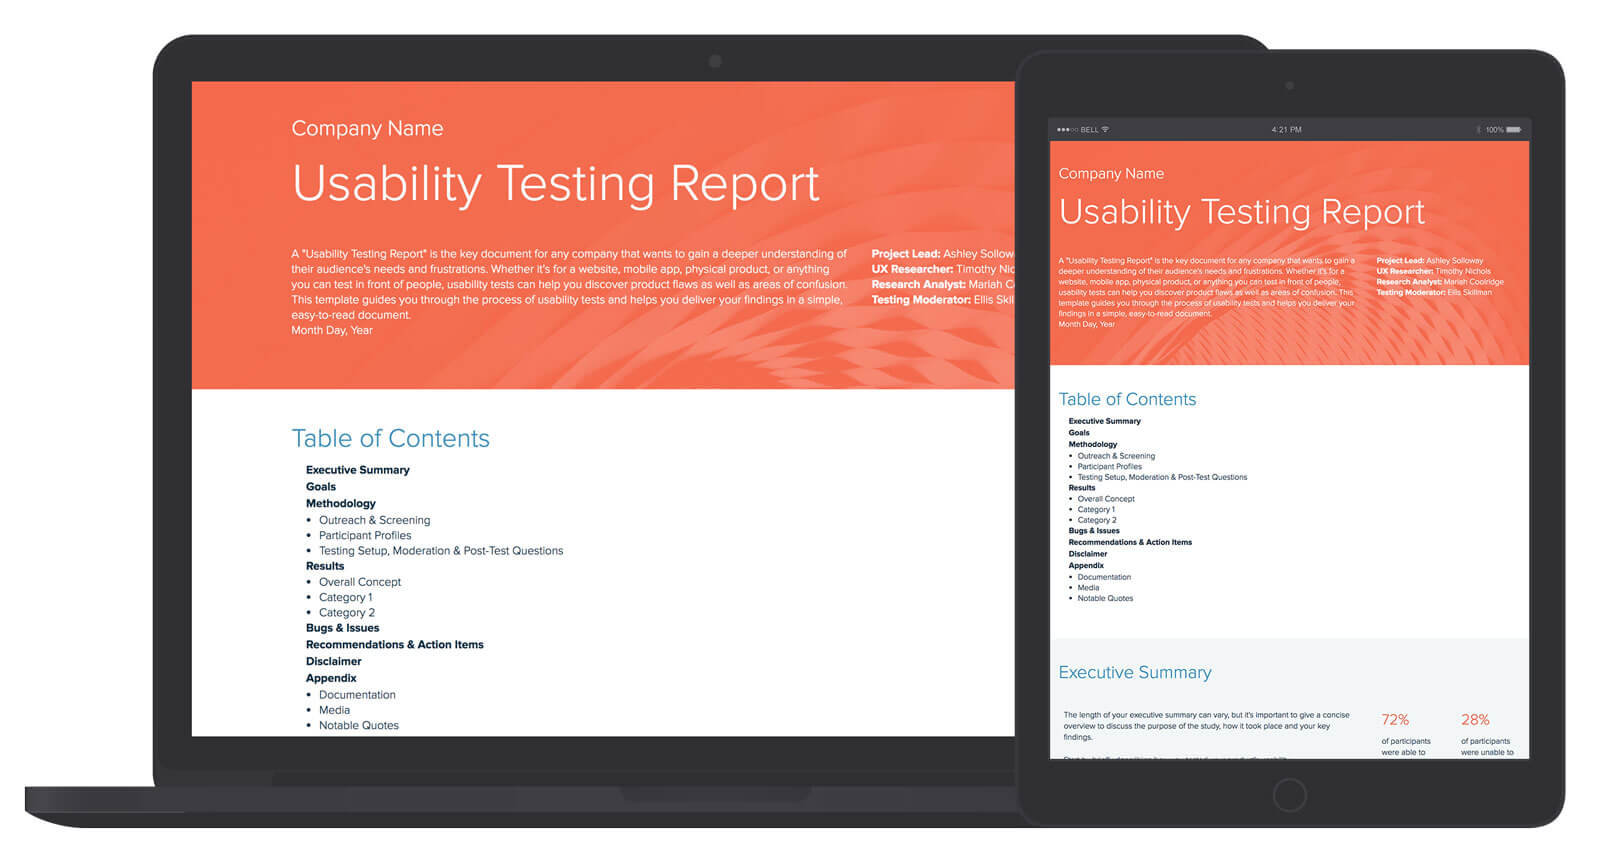 Usability Testing Report Template And Examples | Xtensio With Regard To Usability Test Report Template